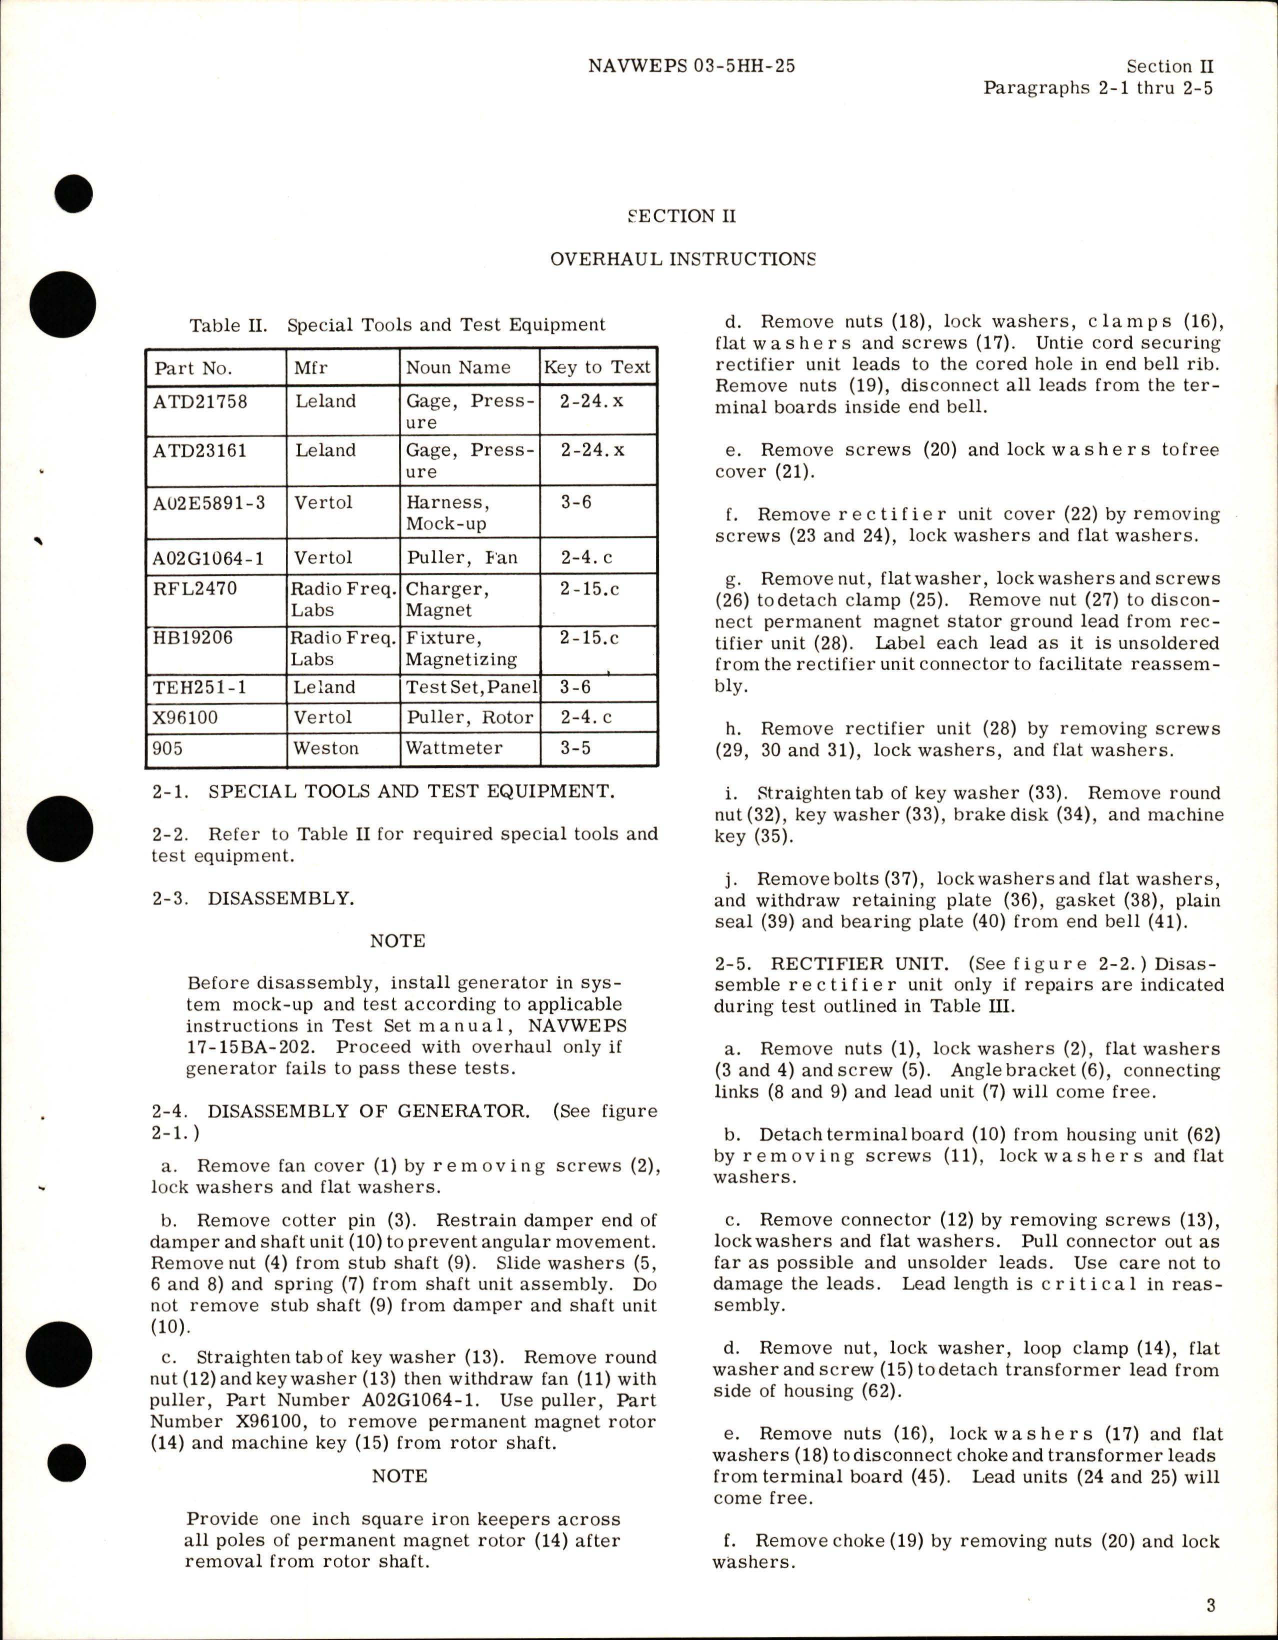 Sample page 7 from AirCorps Library document: Overhaul Instructions for AC-DC Generator - Part AGH173-1, AGH173-1MA and AGH173-2